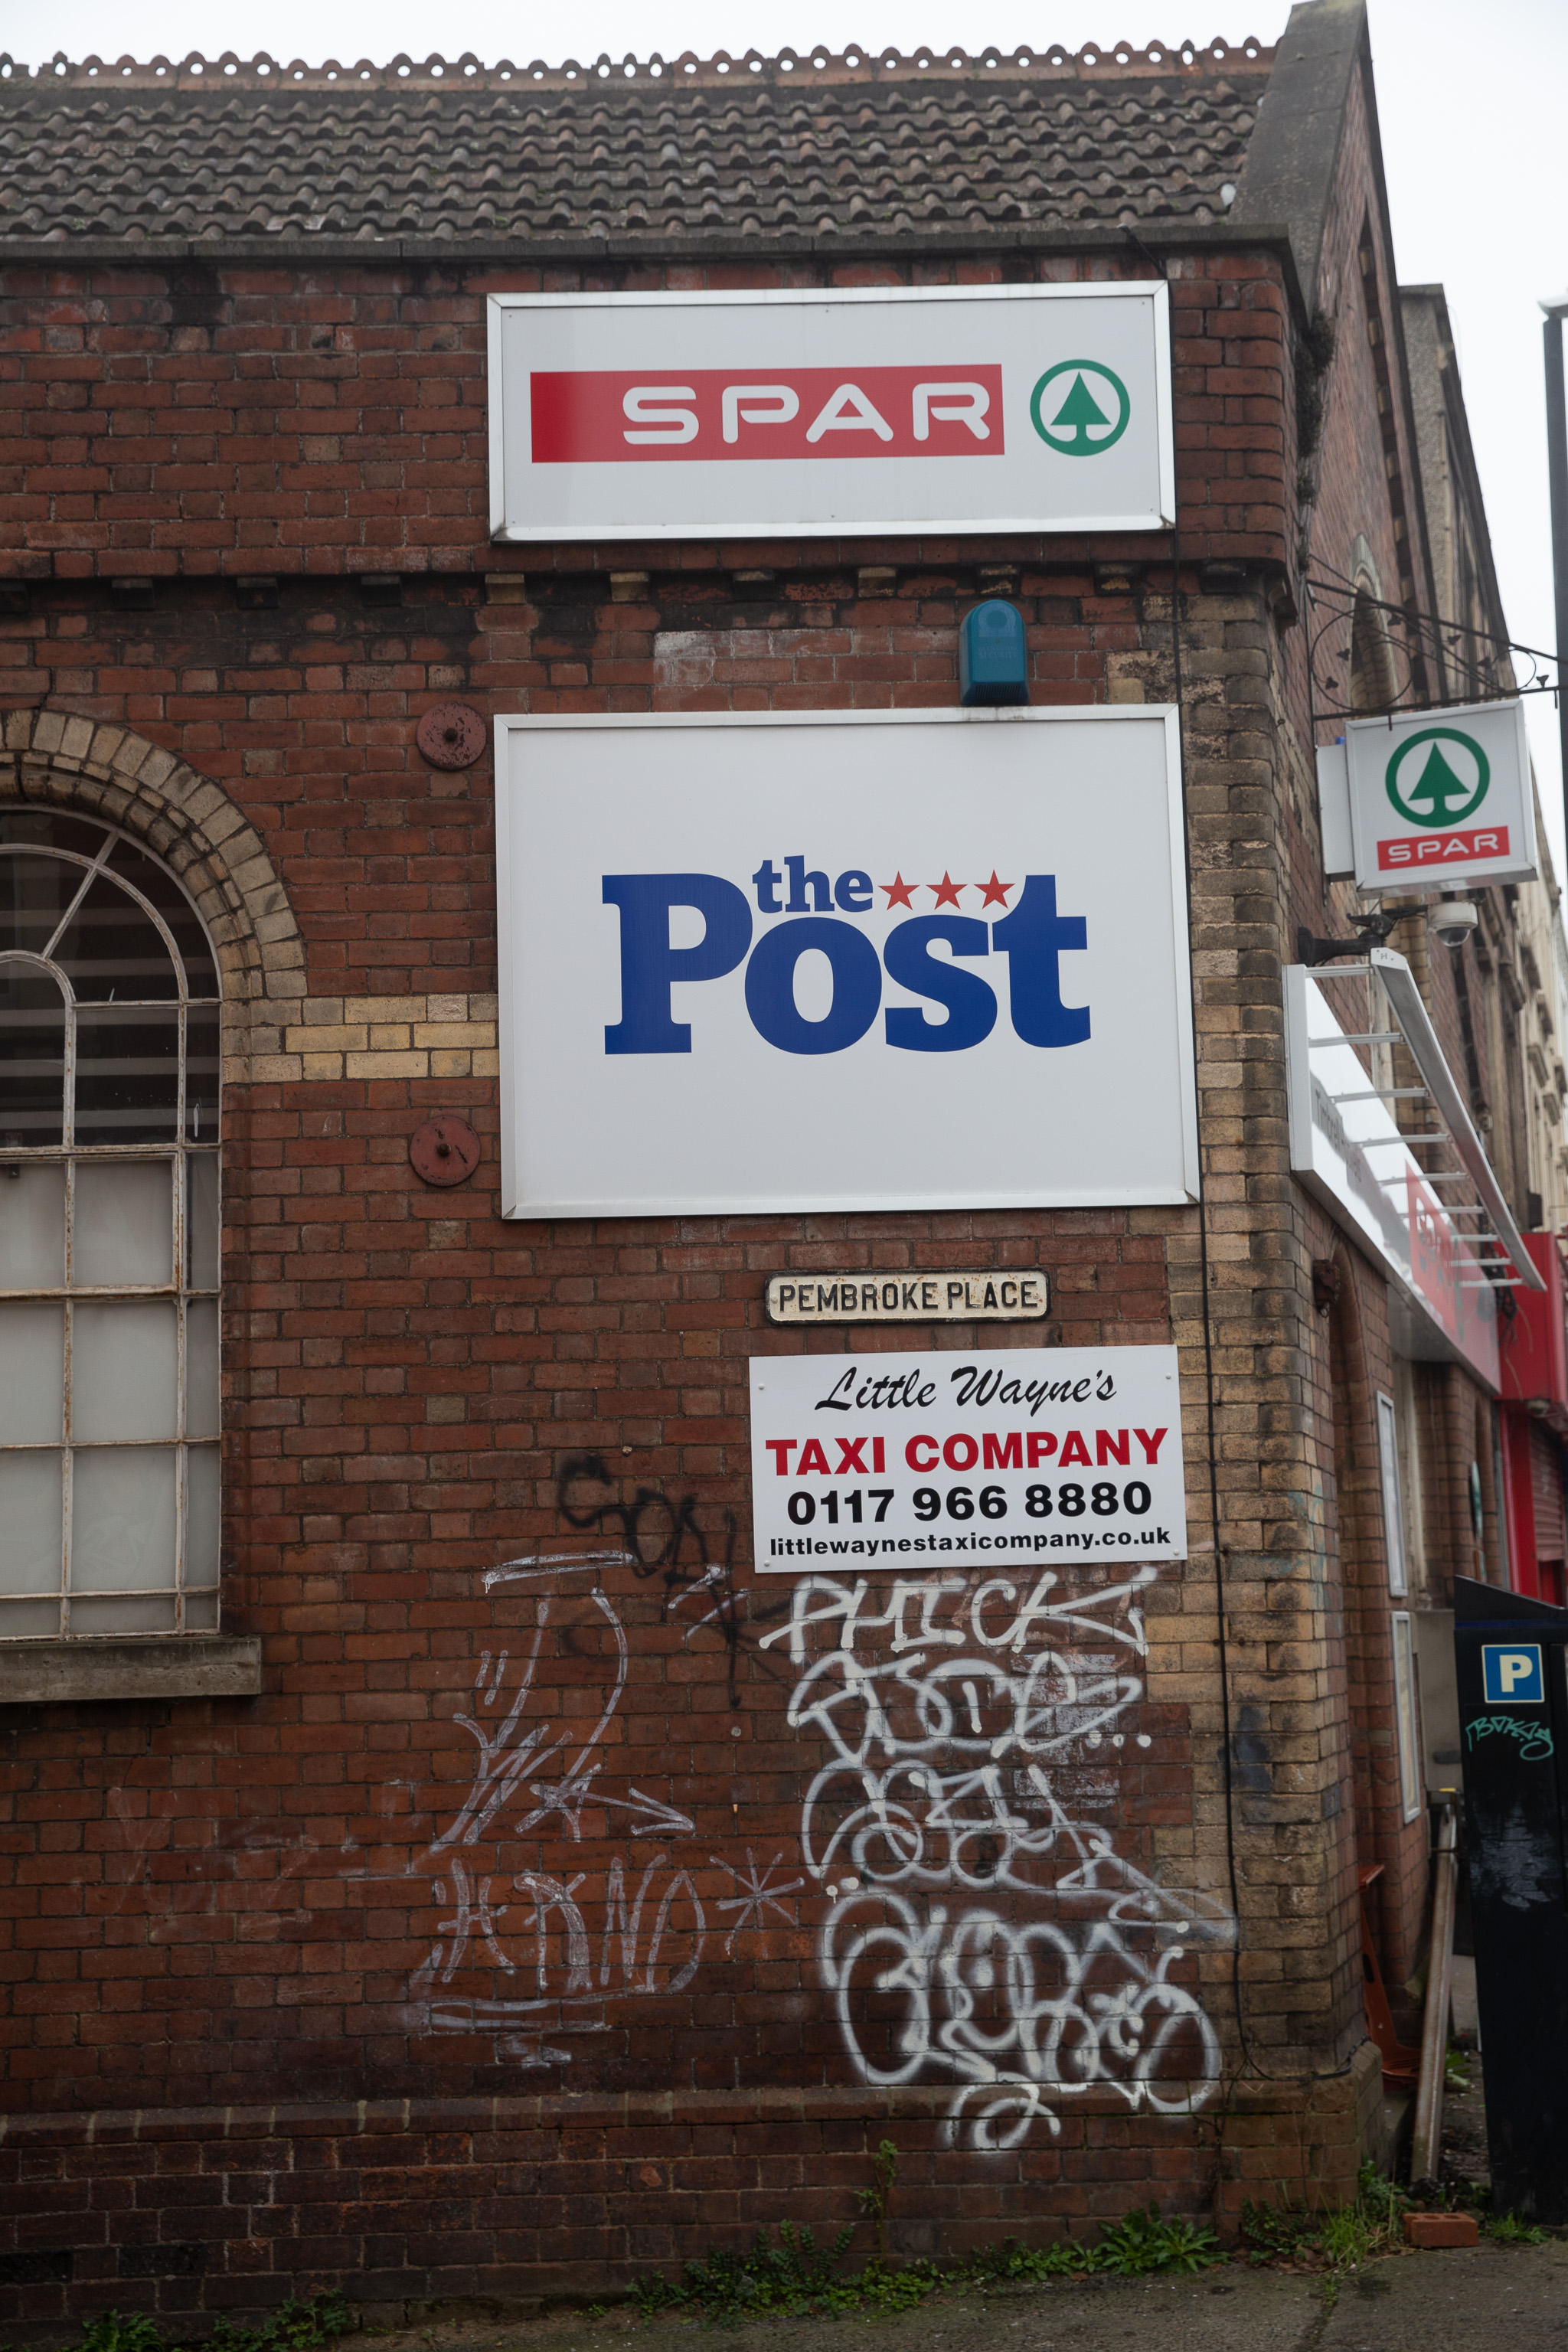 Pembroke Place
And, inevitably, a load of tagging. The Spar is a pretty awful example of the kind of chain shop that's not good at the best of times. It survives,...